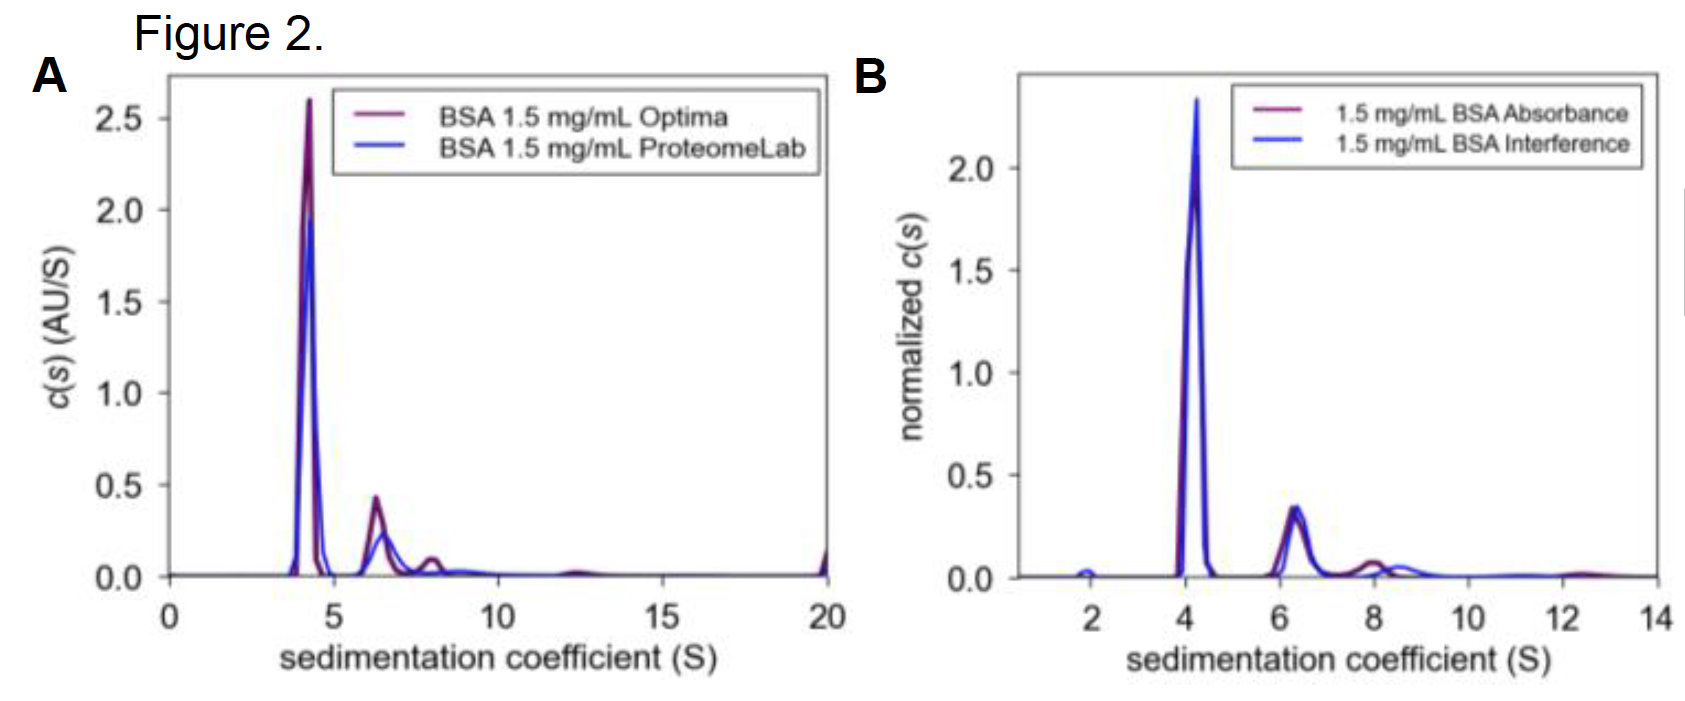 SEDFIT c(s) plots of 1.5 mg/mL BSA in PBS between instruments (A) and optical systems of the Optima AUC (B).